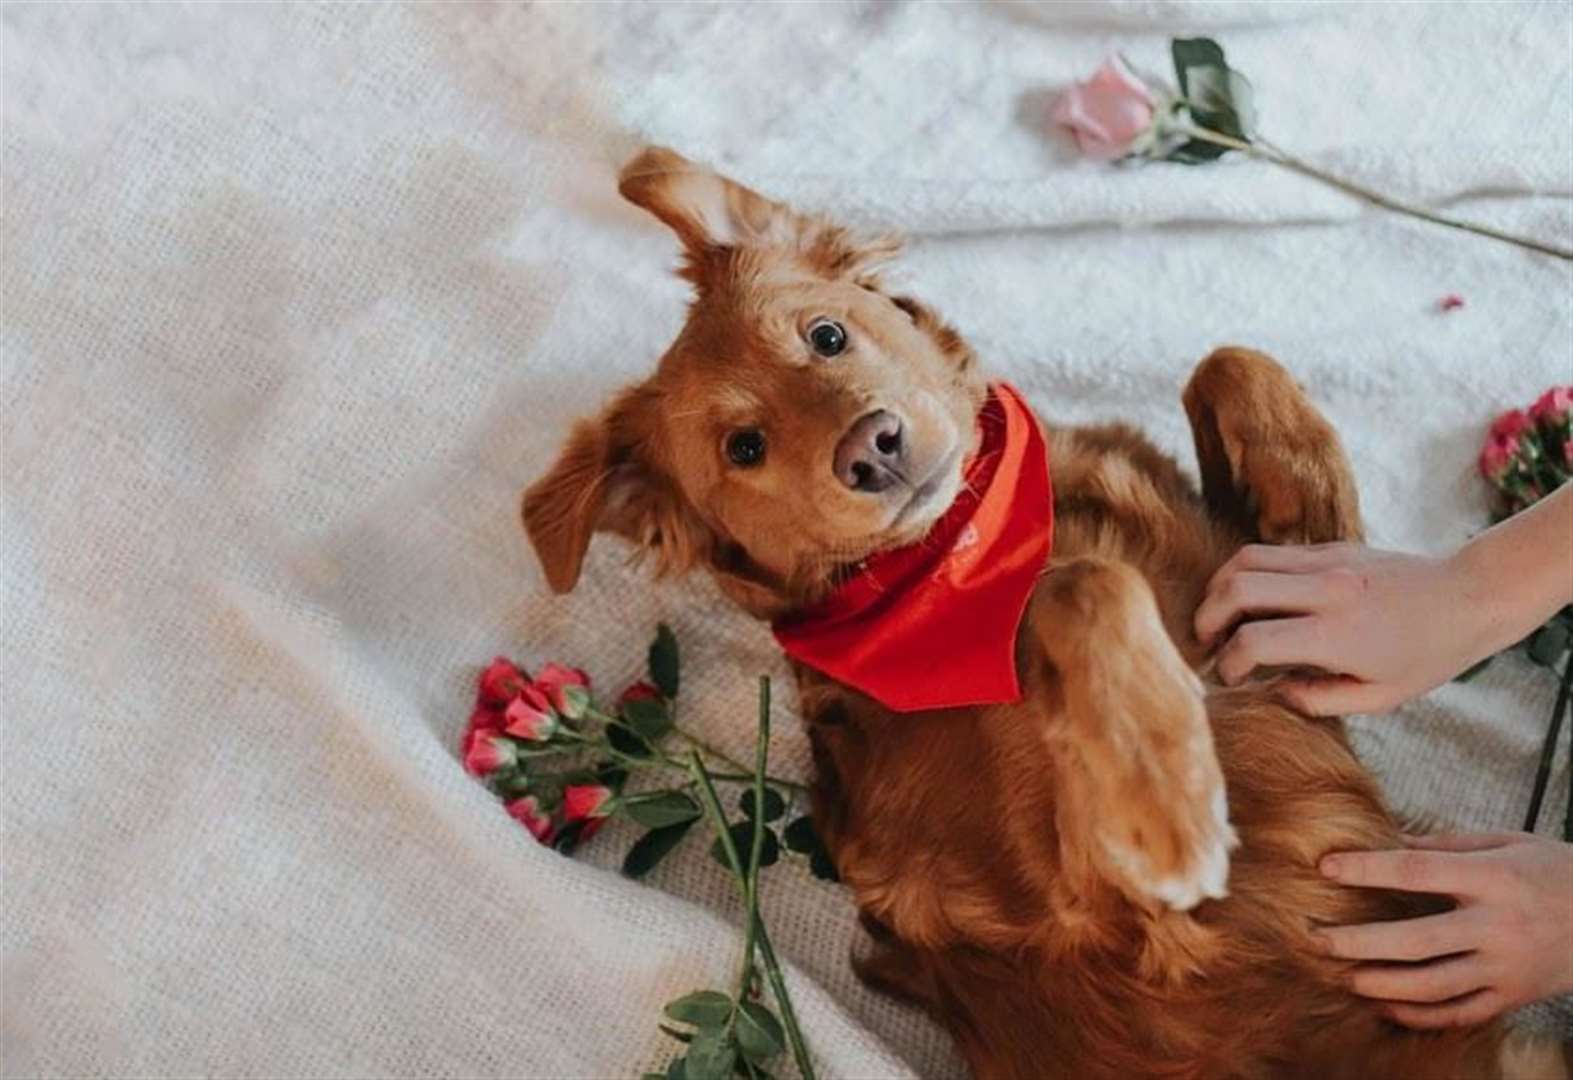 How to have a safe Valentine's Day with your pet